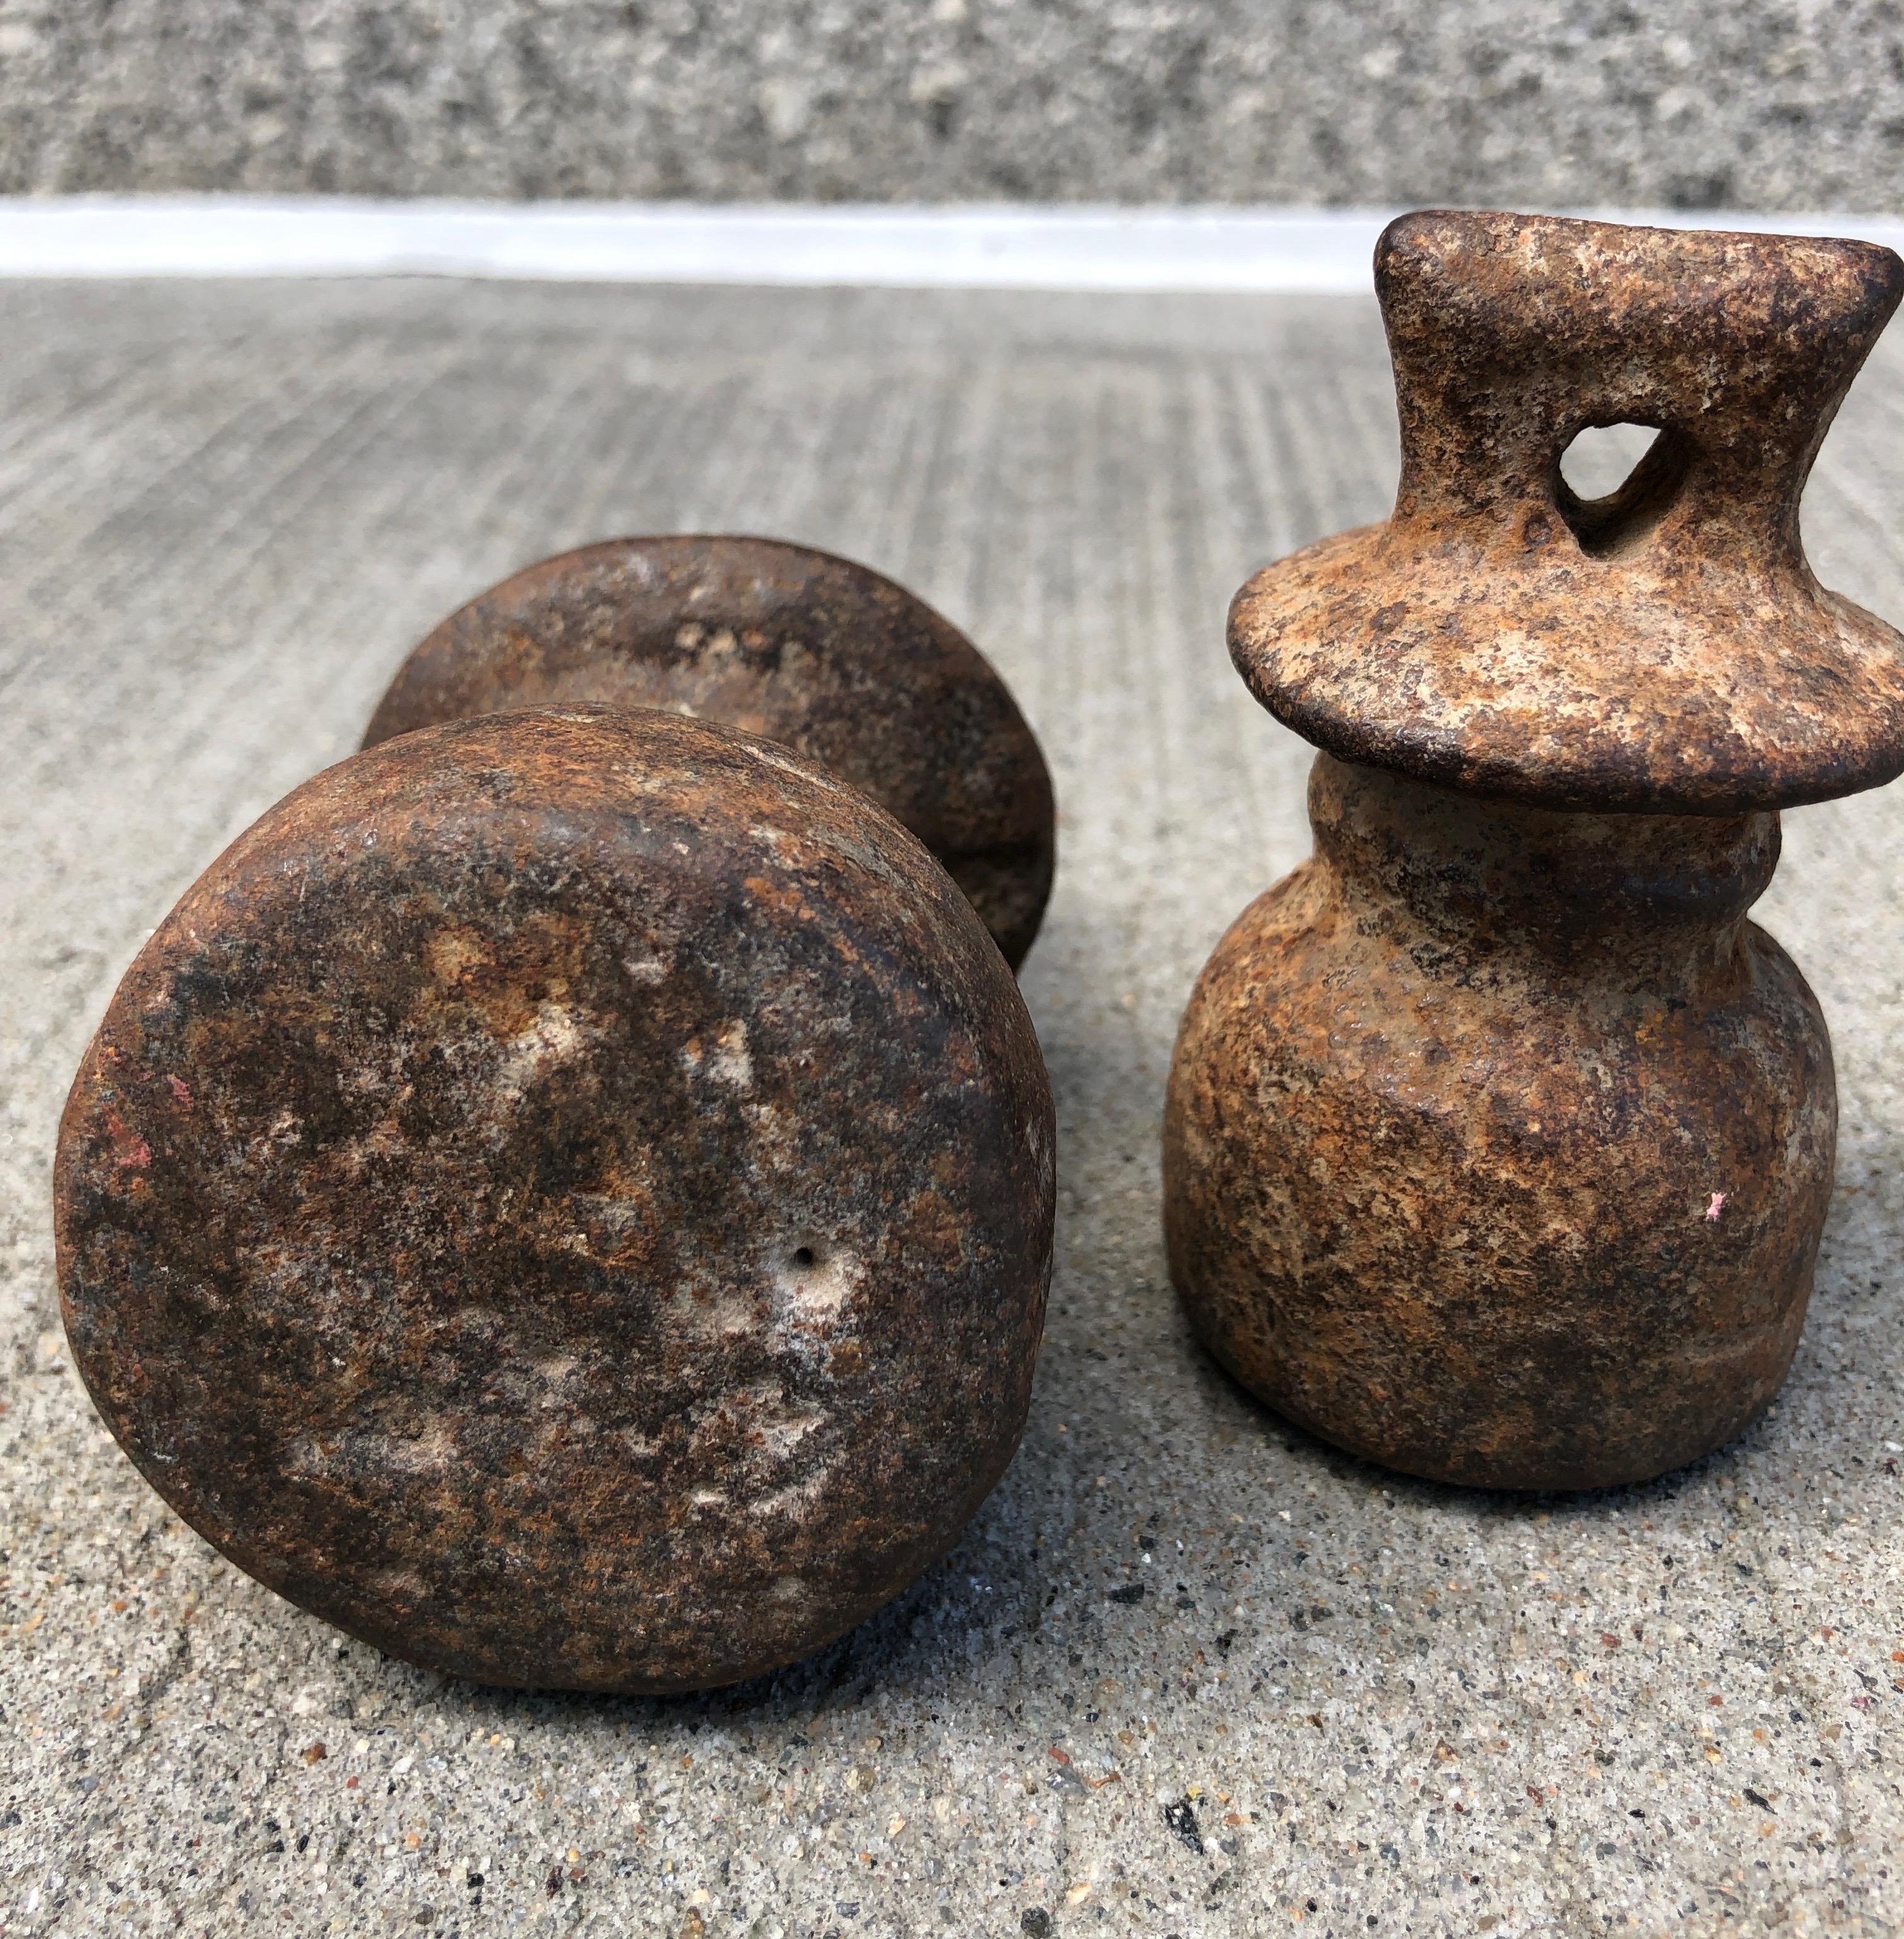 A beautiful pair of solid cast iron Chinese scale weights, each showing great patina. These tactile pieces from Shanxi Province are great for shelf or desk display and use. Sold as a set.
Dimensions: 
Left in main image : Height: 4 diameter: